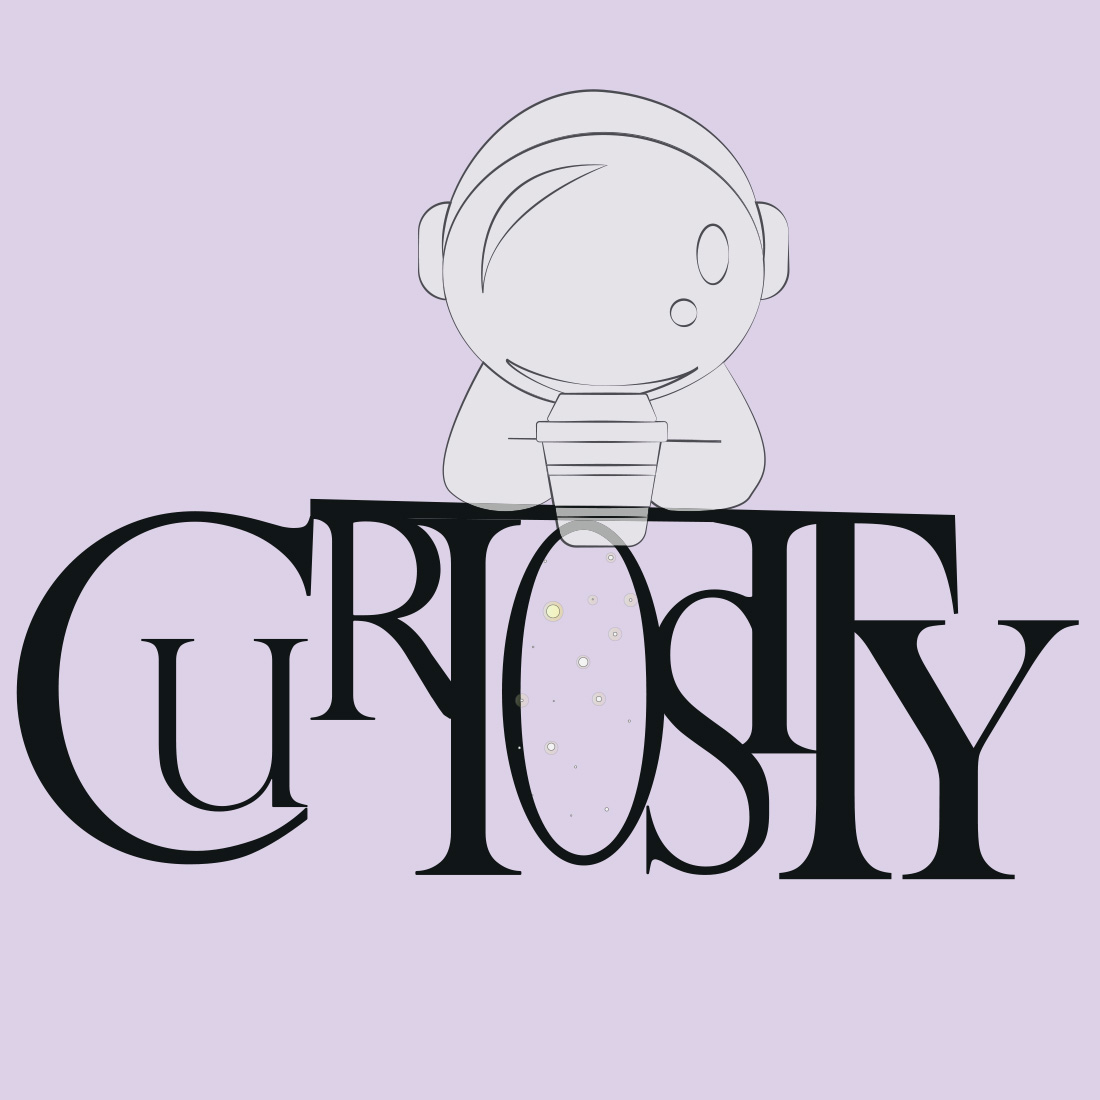 Space coffee curiosity vector logo gray preview image.